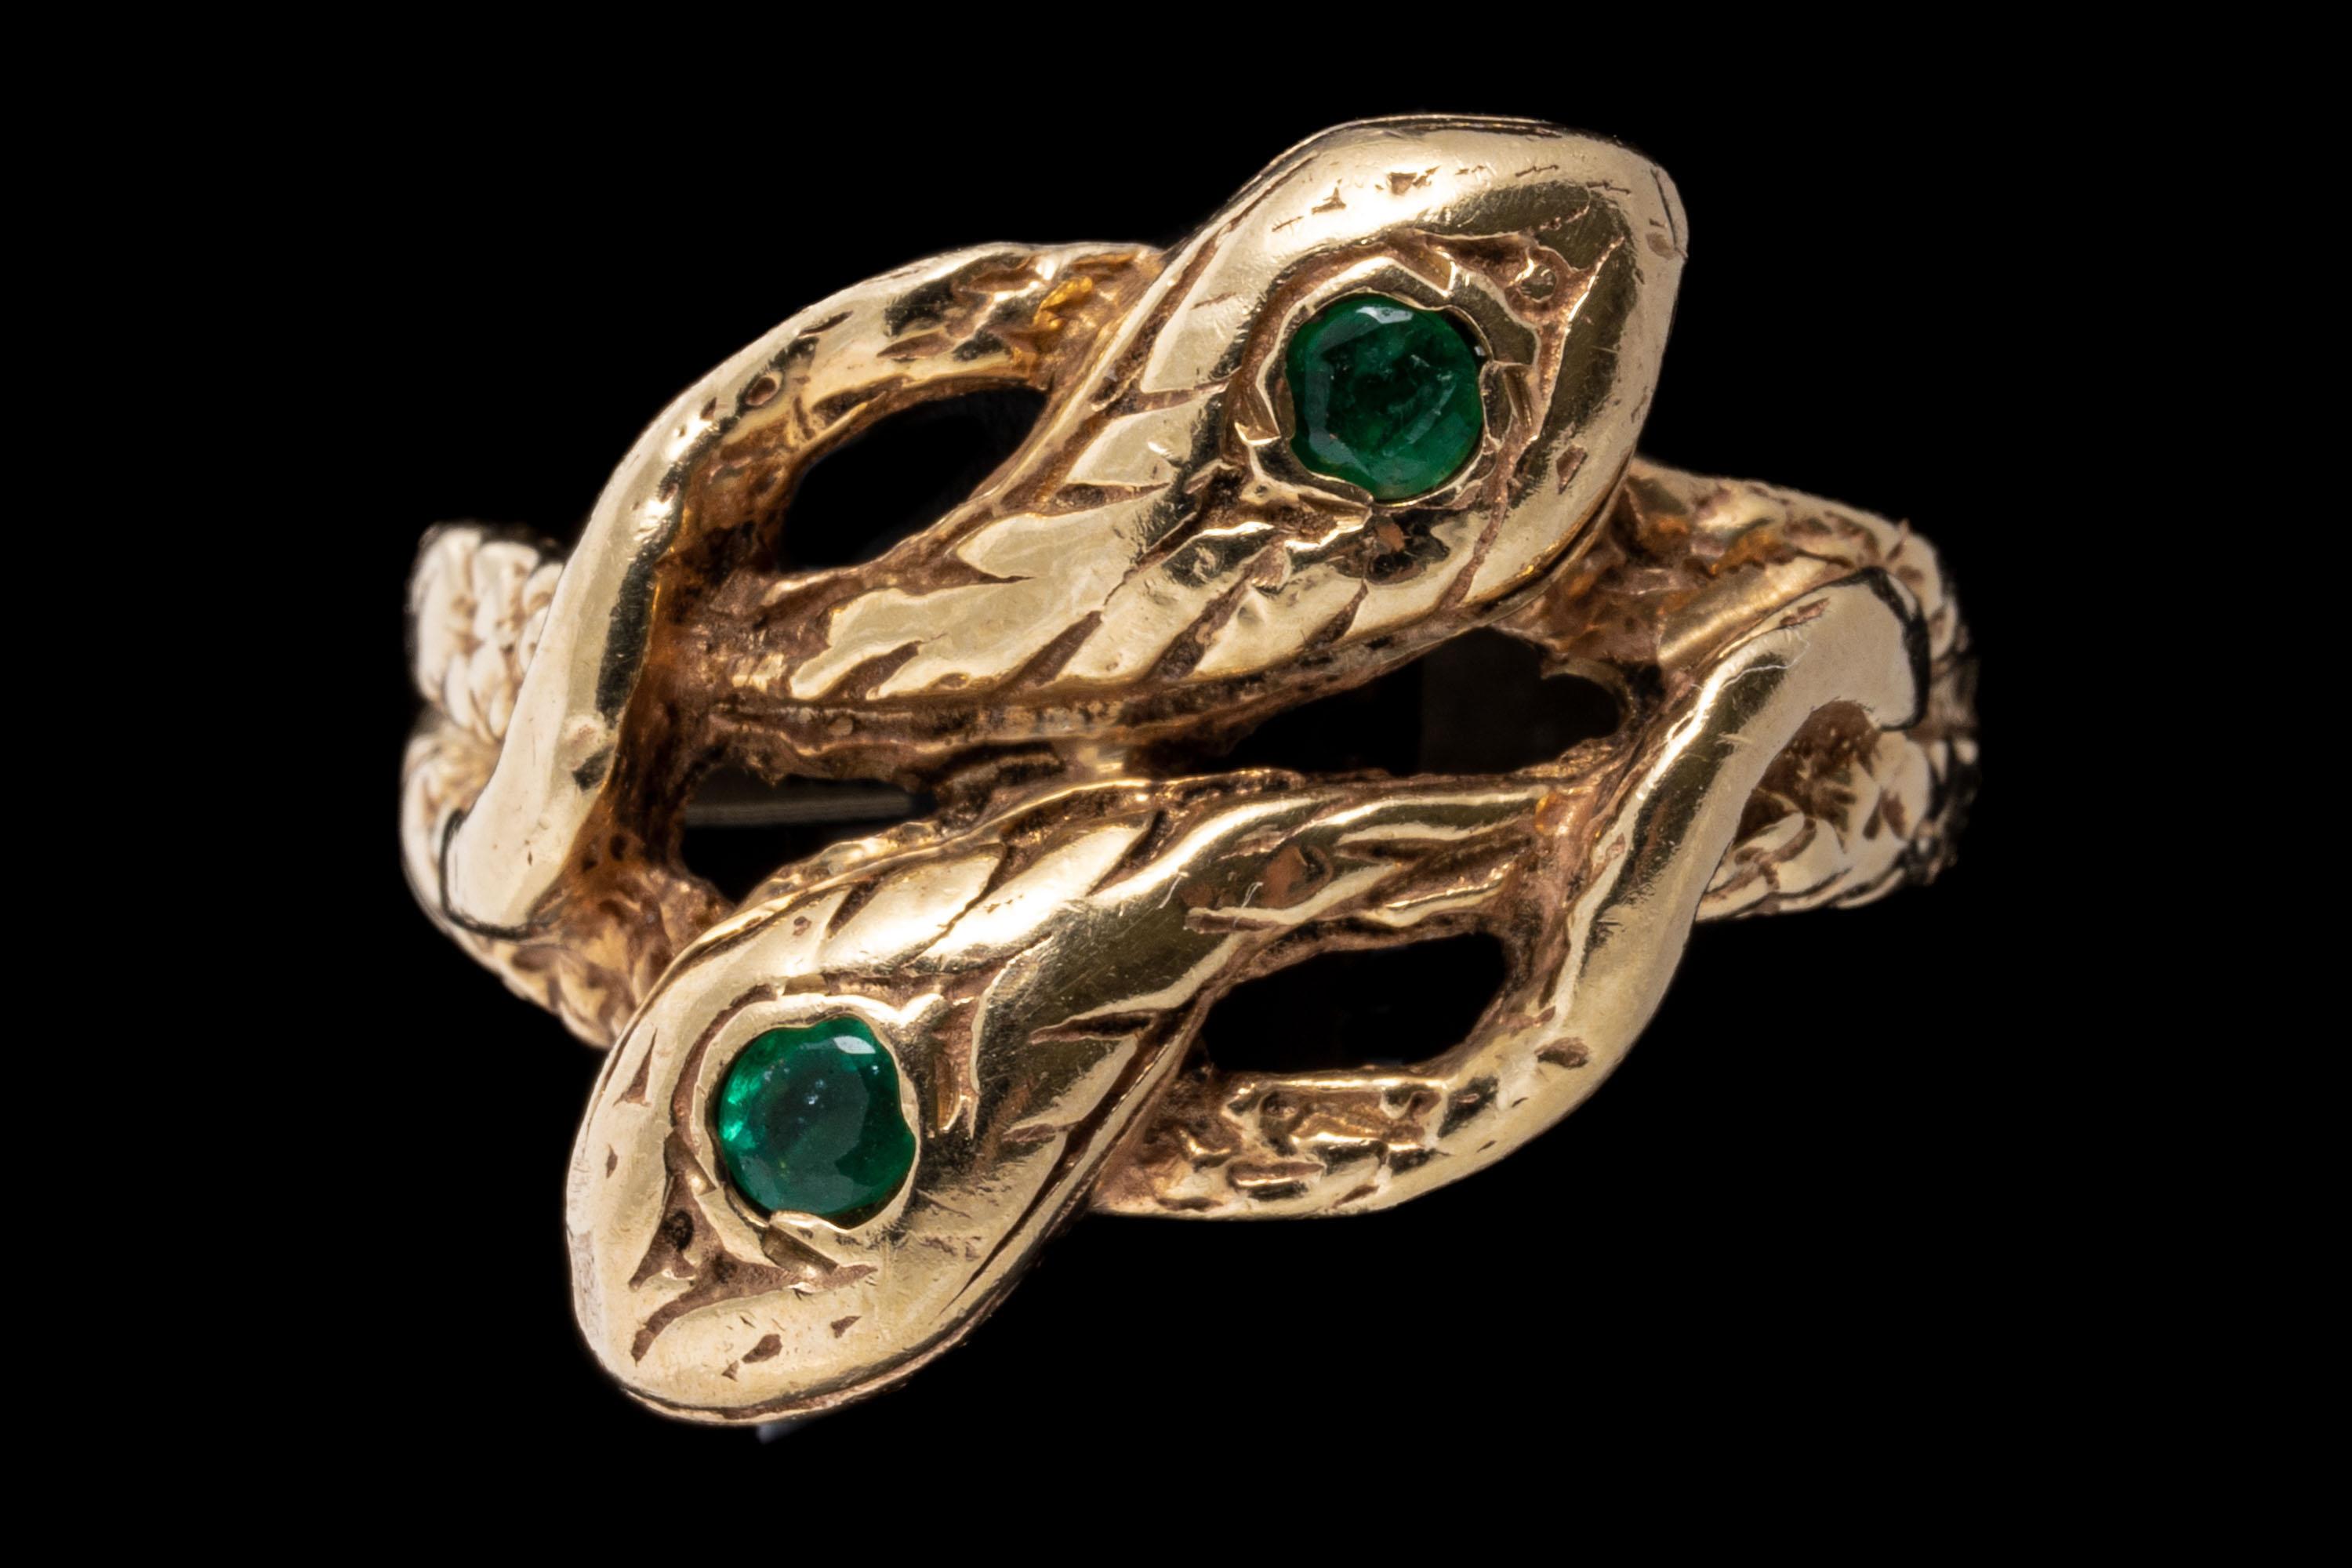 14k yellow gold ring. This beautiful ring is an intertwining serpent motif of two bypassing snakes, with a patterned finished body, finished by two round faceted, green emeralds, approximately 0.14 TCW decorating each of the heads, flush set.
Marks: